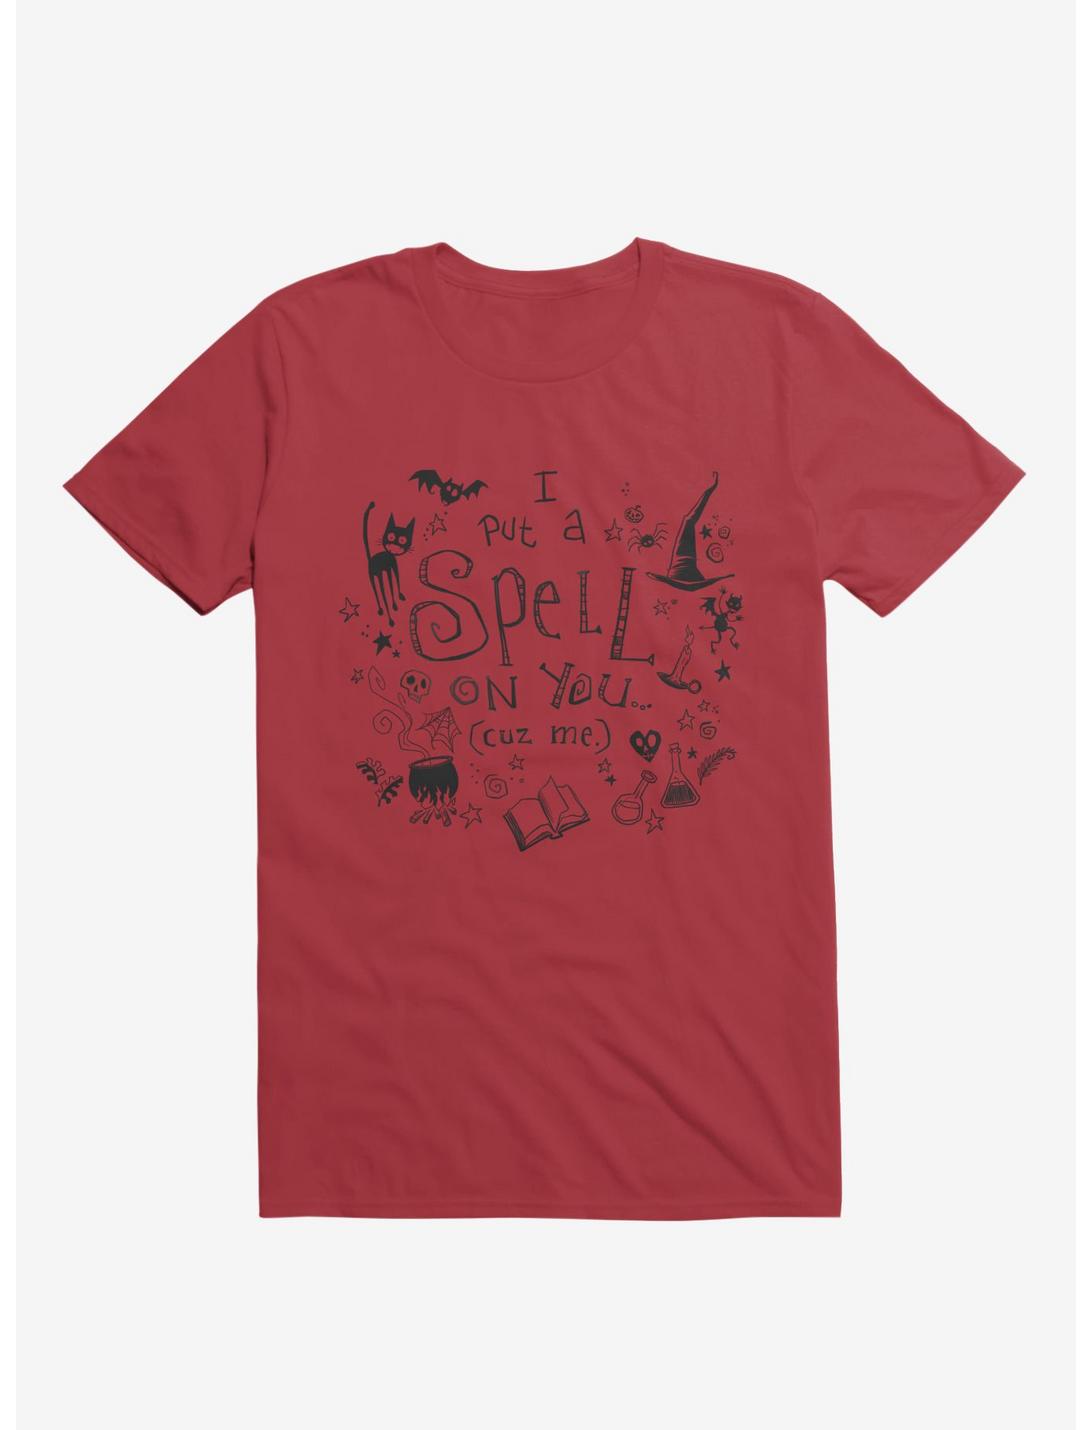 Spell On You Red T-Shirt, RED, hi-res